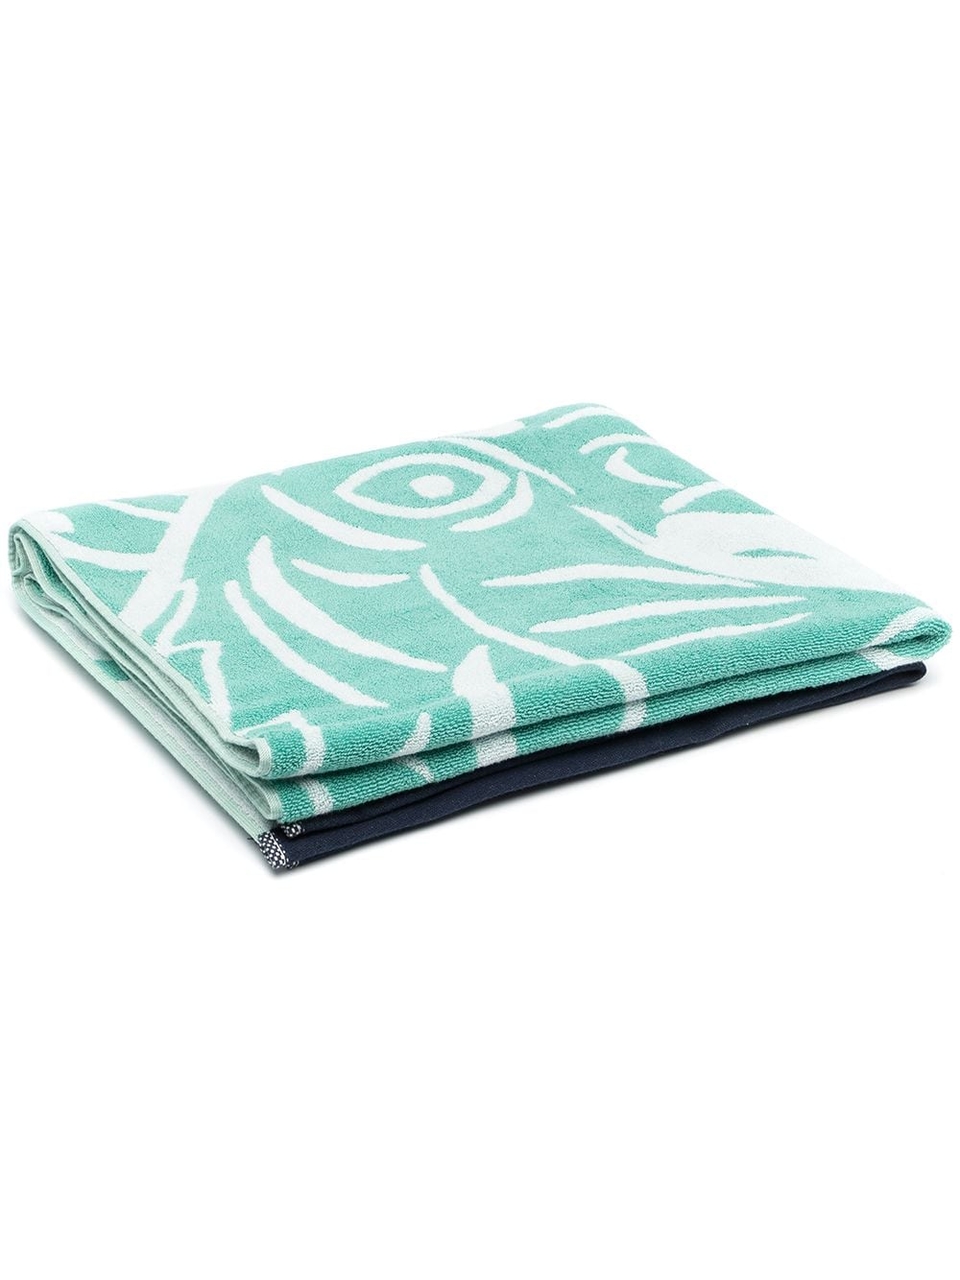 Kenzo Tiger Jade - Passion Home Linen